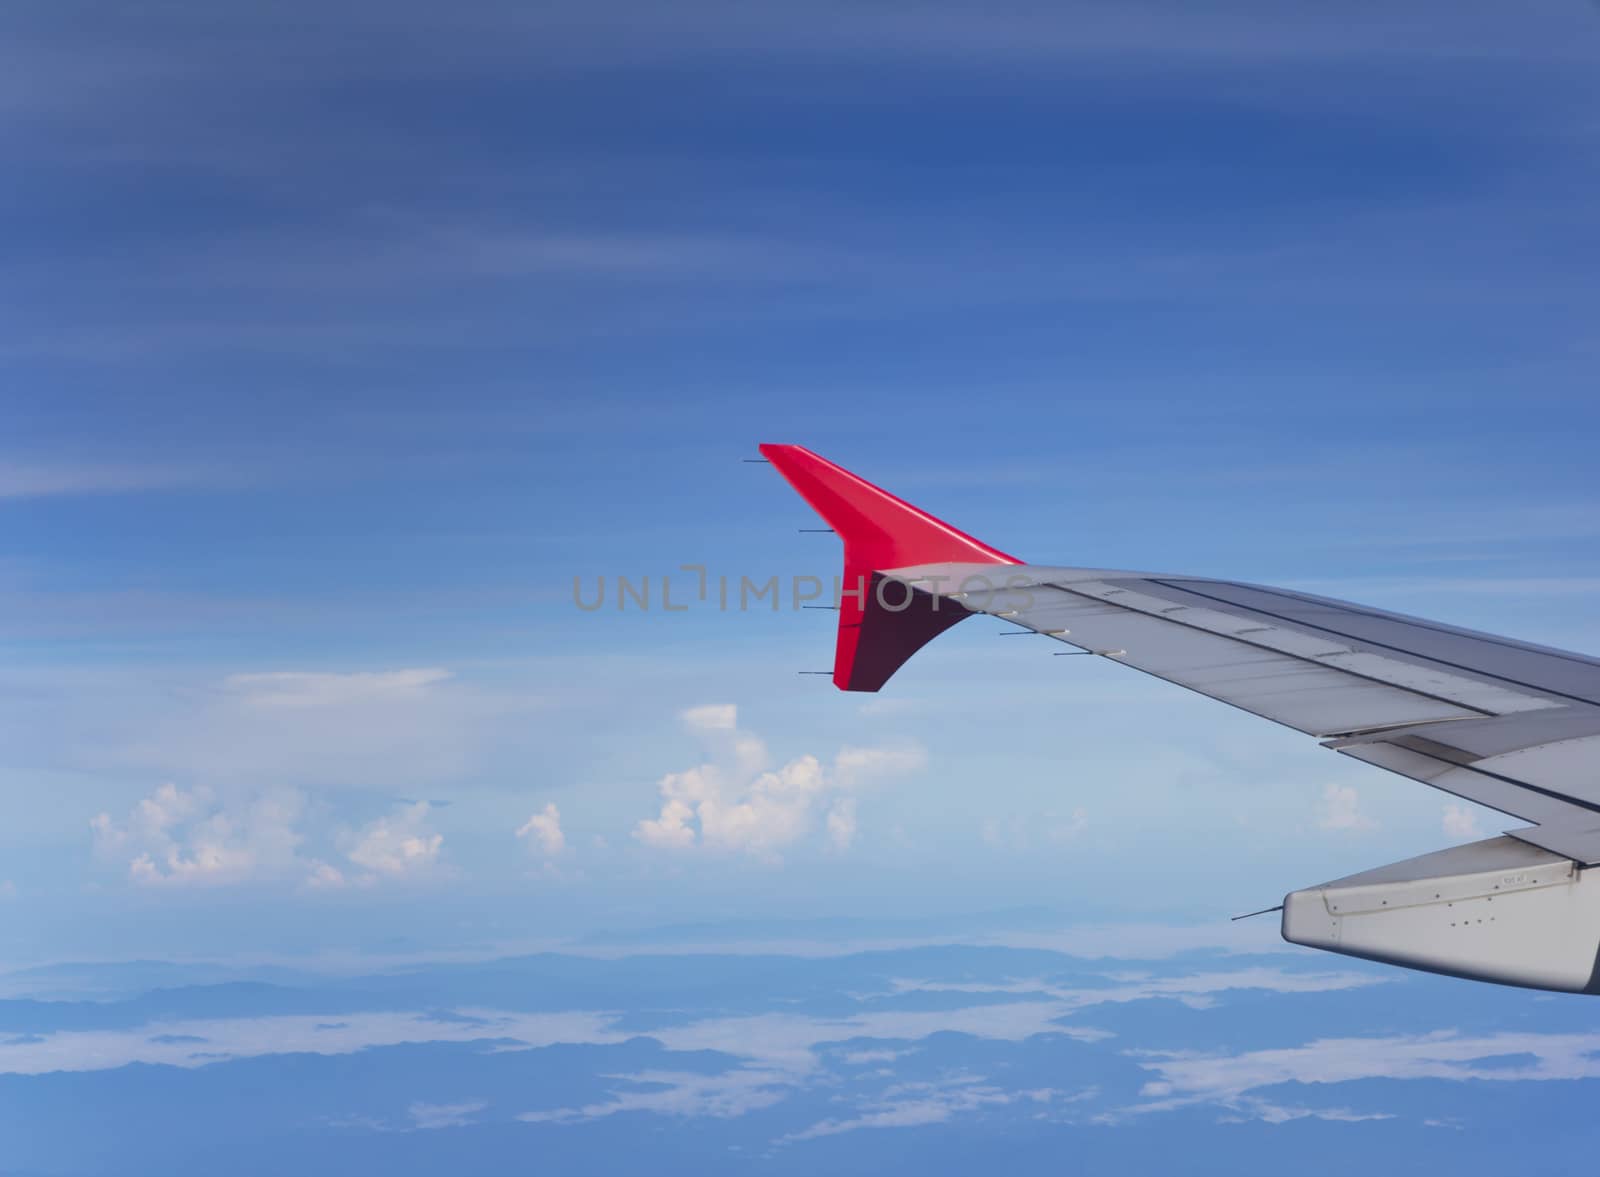 Wing of the plane over blue sky background, by wyoosumran